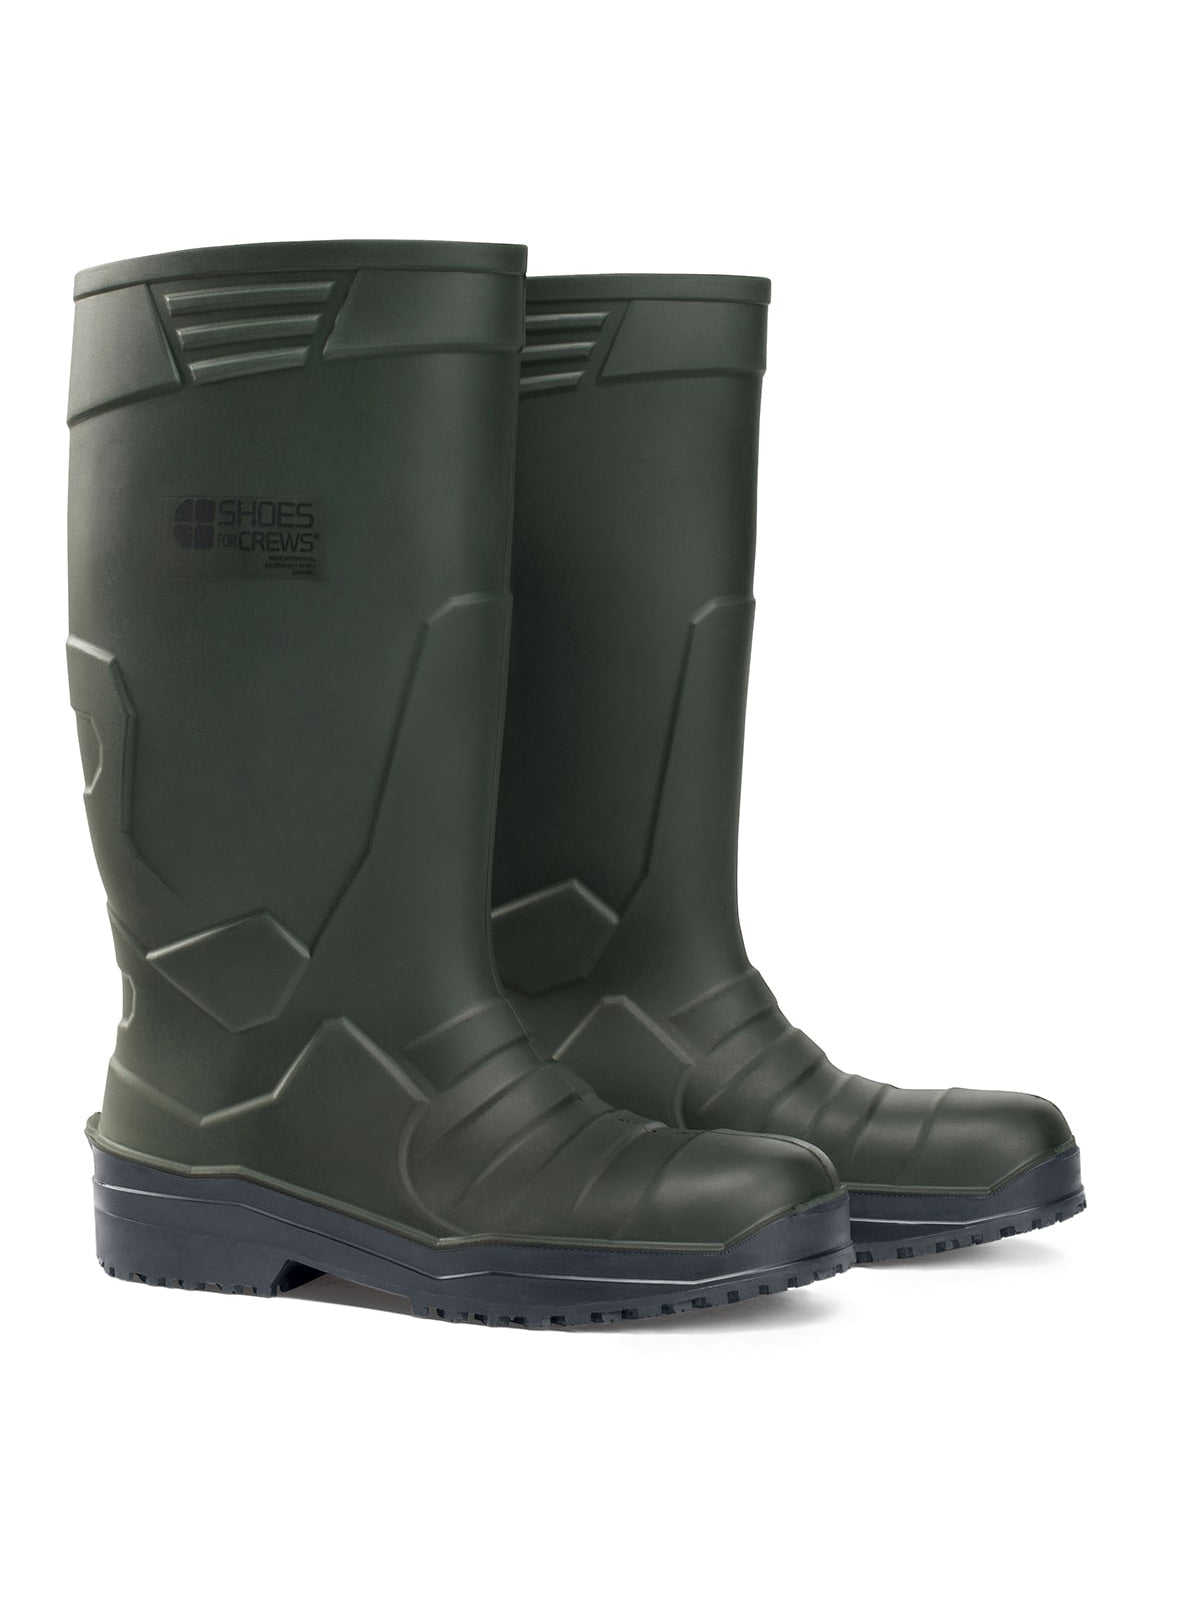 Unisex Safety Boot Sentinel Green (S4) by Shoes For Crews -  ChefsCotton